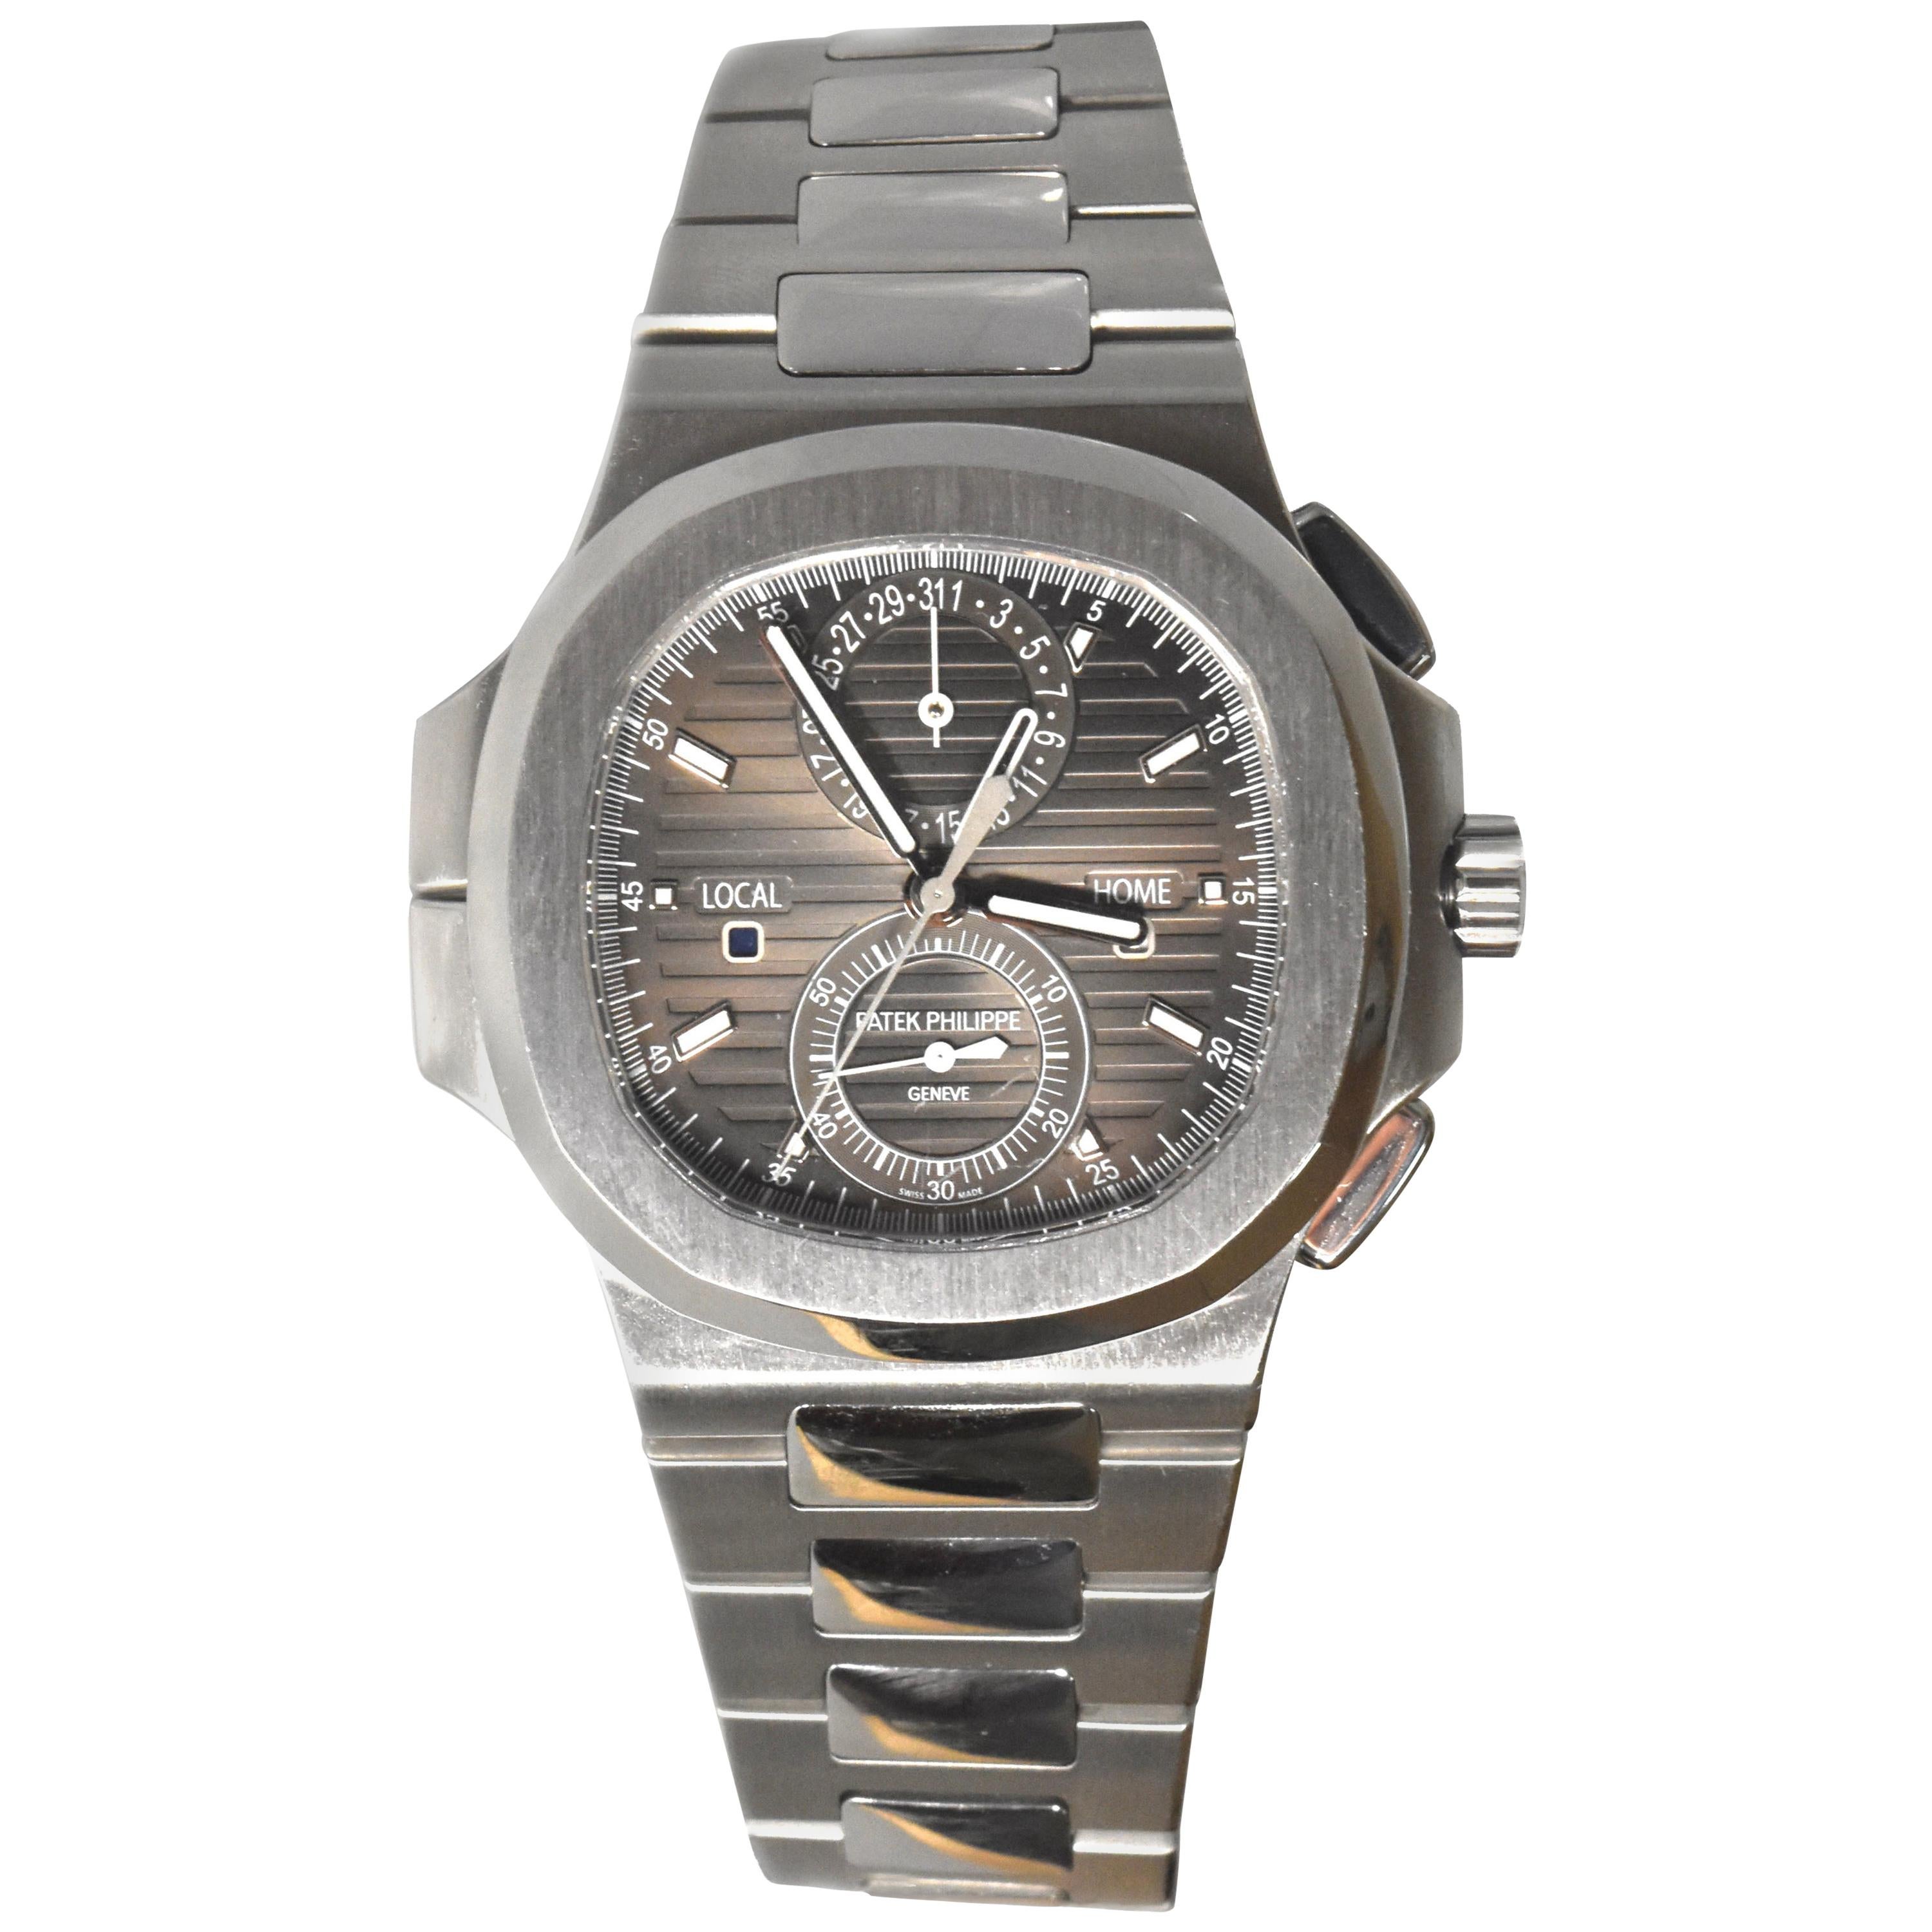 Patek Philippe Nautilus Travel Time Chronograph Stainless Steel Watch 59901A-001